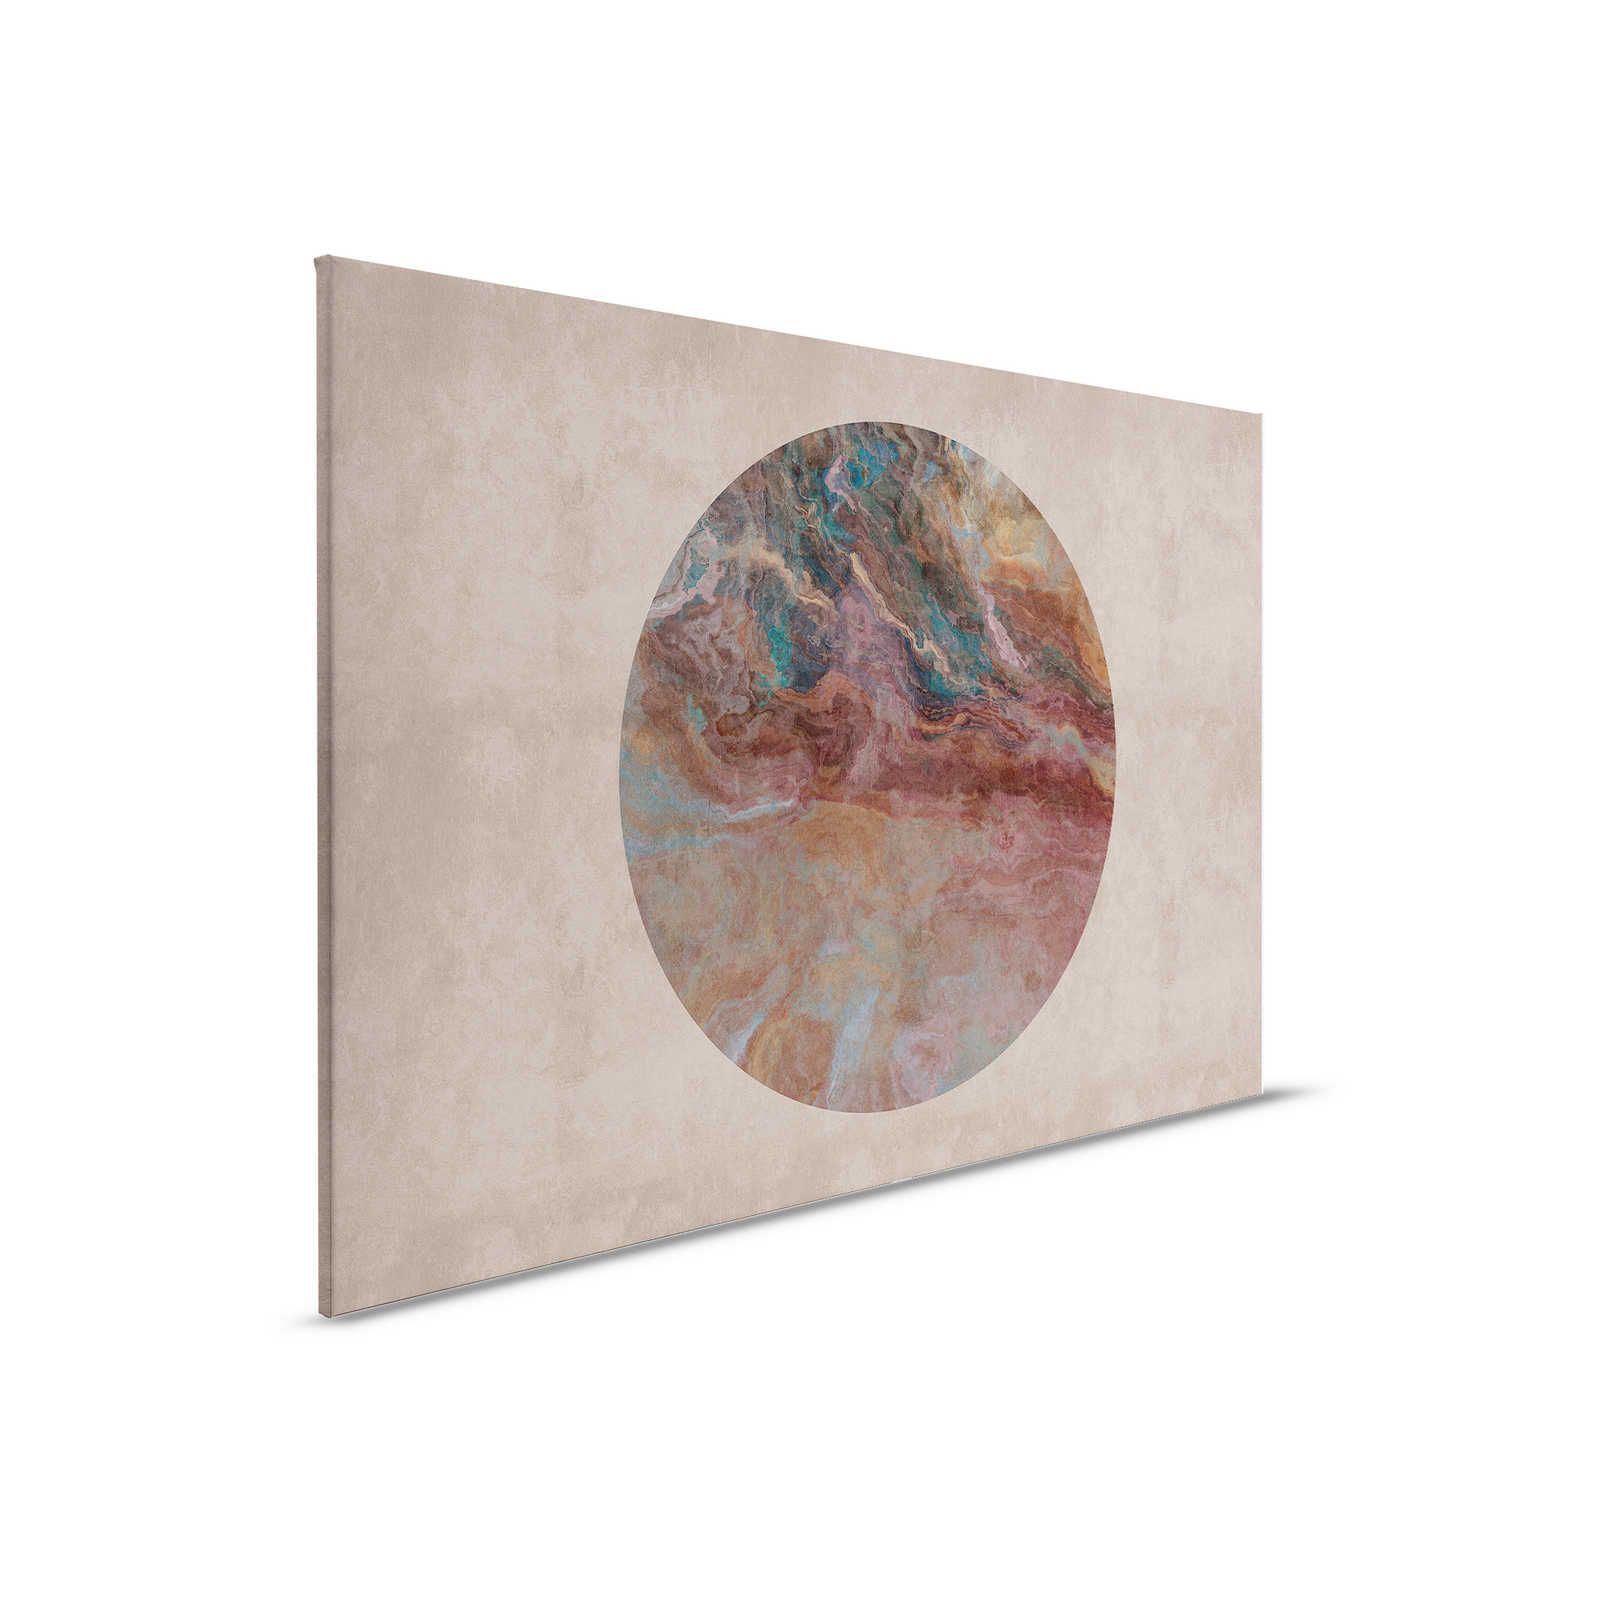         Jupiter 2 - Canvas painting colourful marble circle & plaster look - 0,90 m x 0,60 m
    